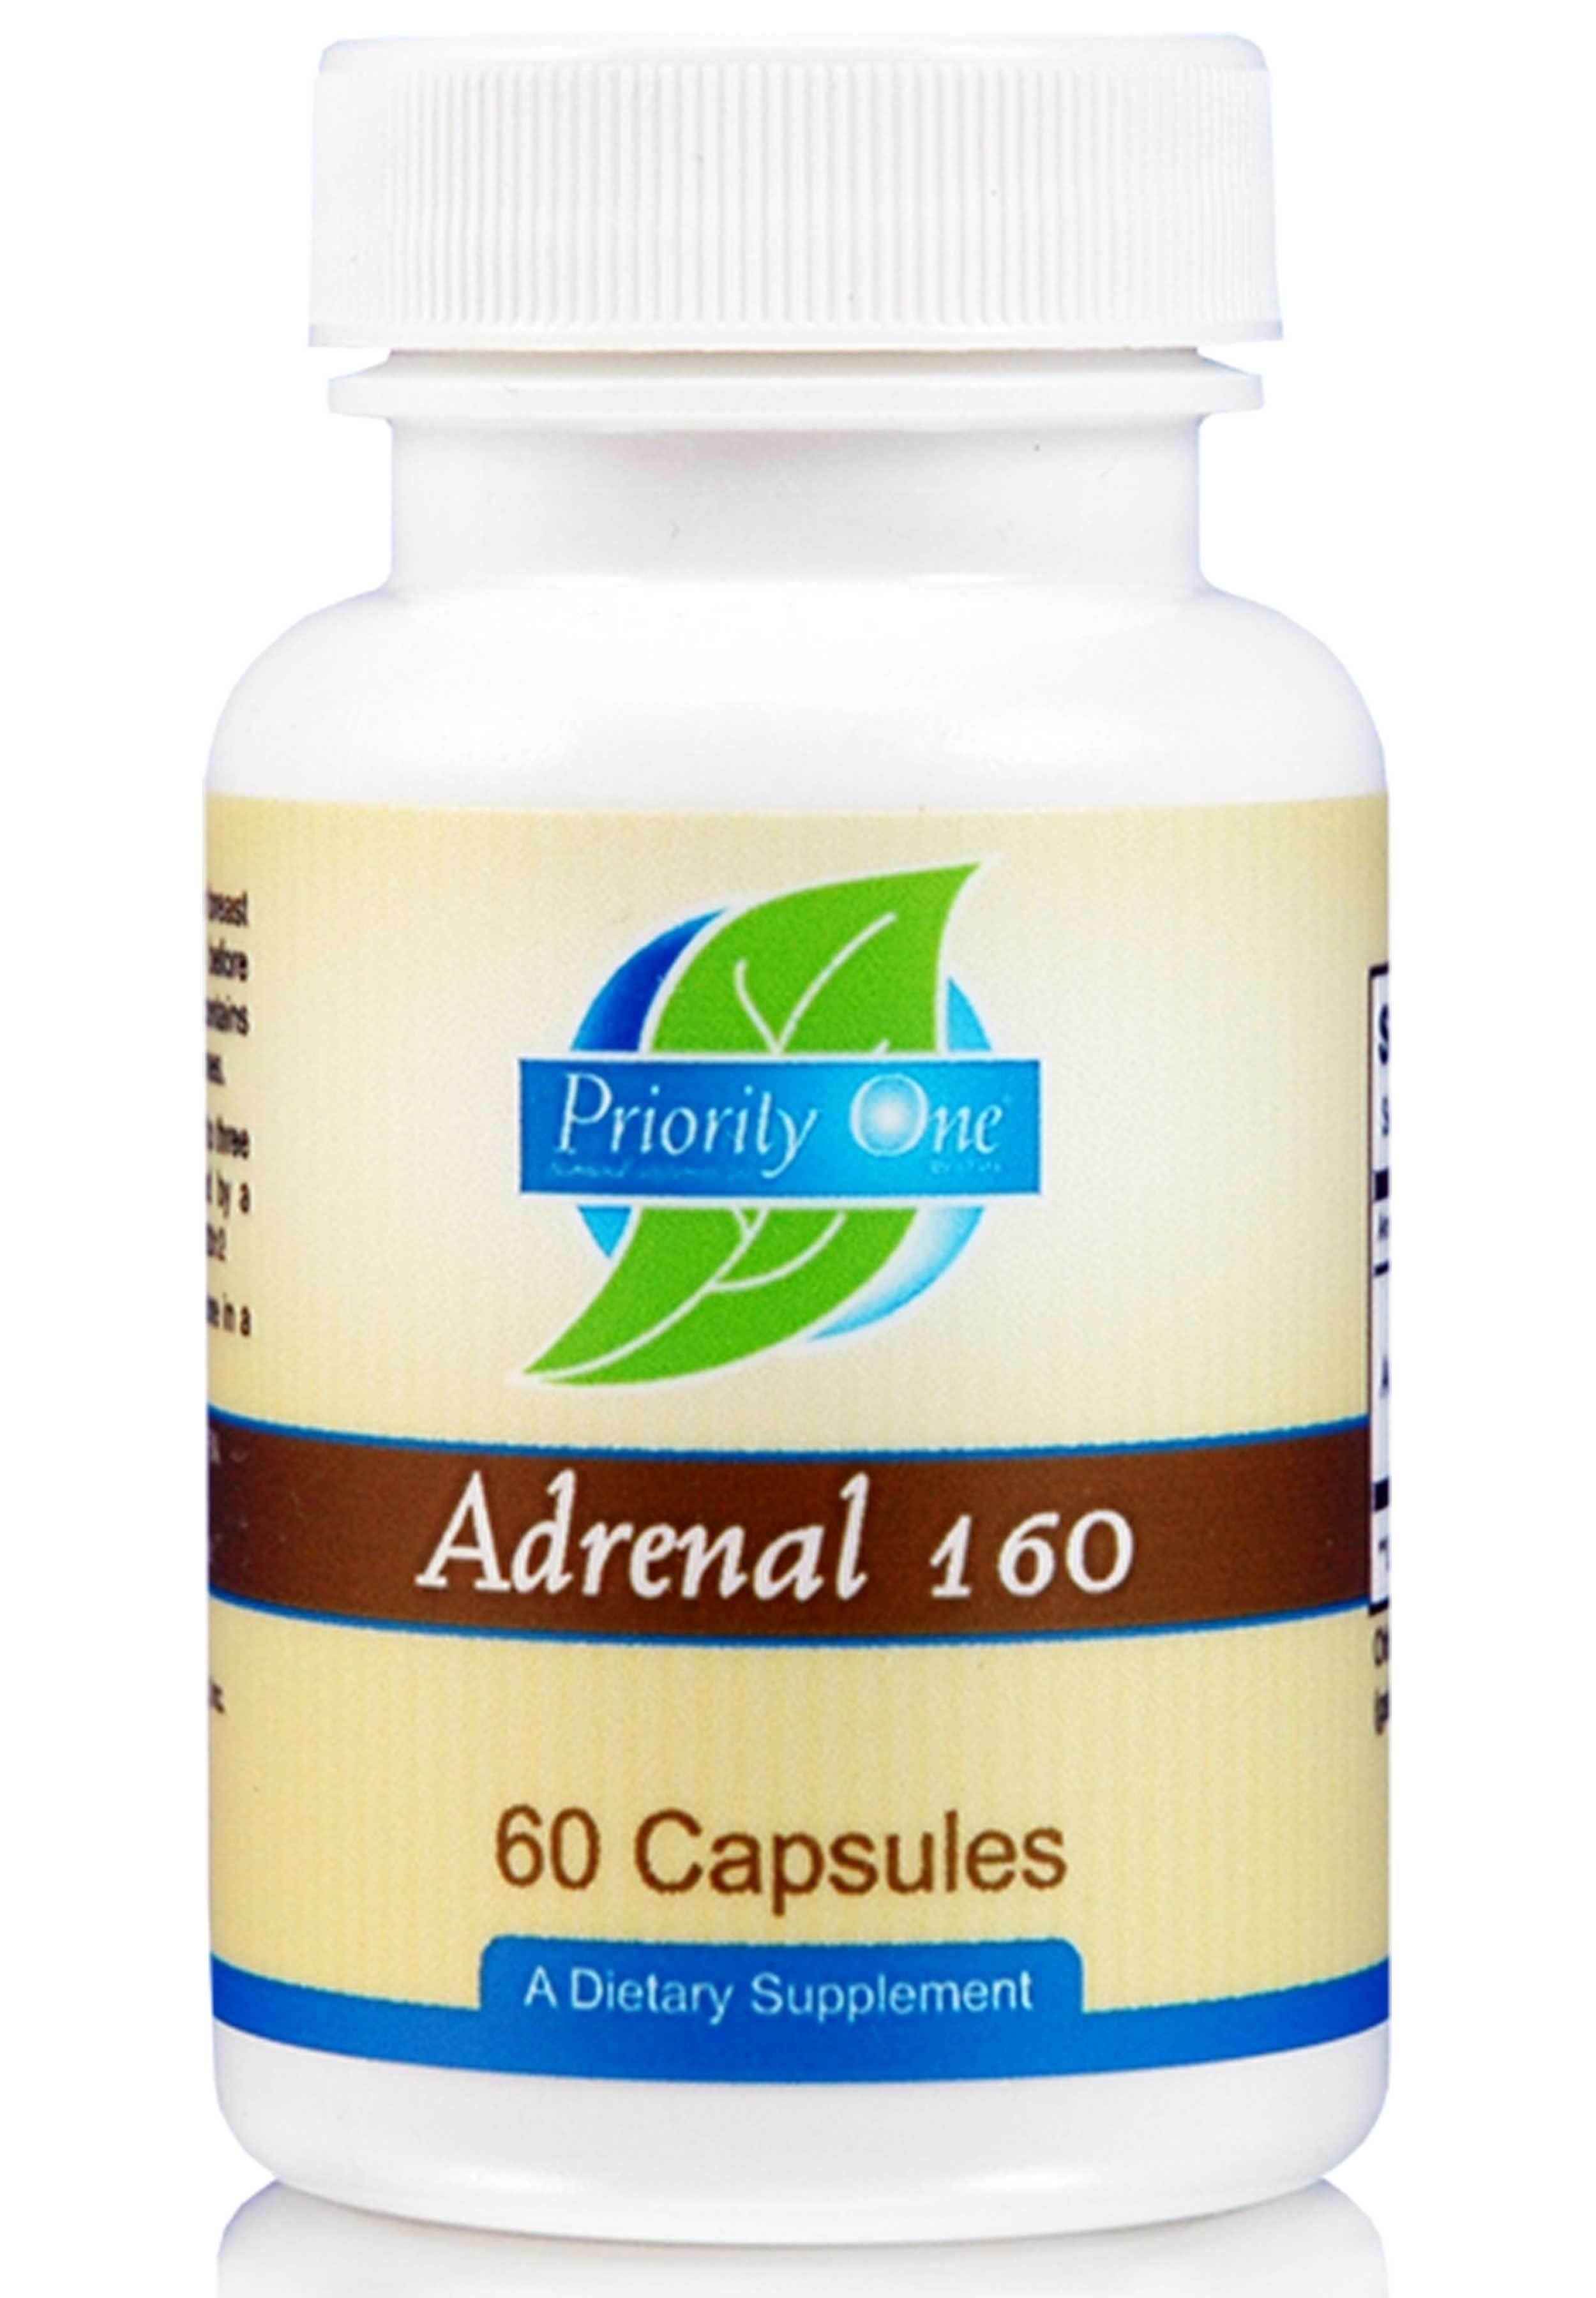 Priority One Adrenal 160